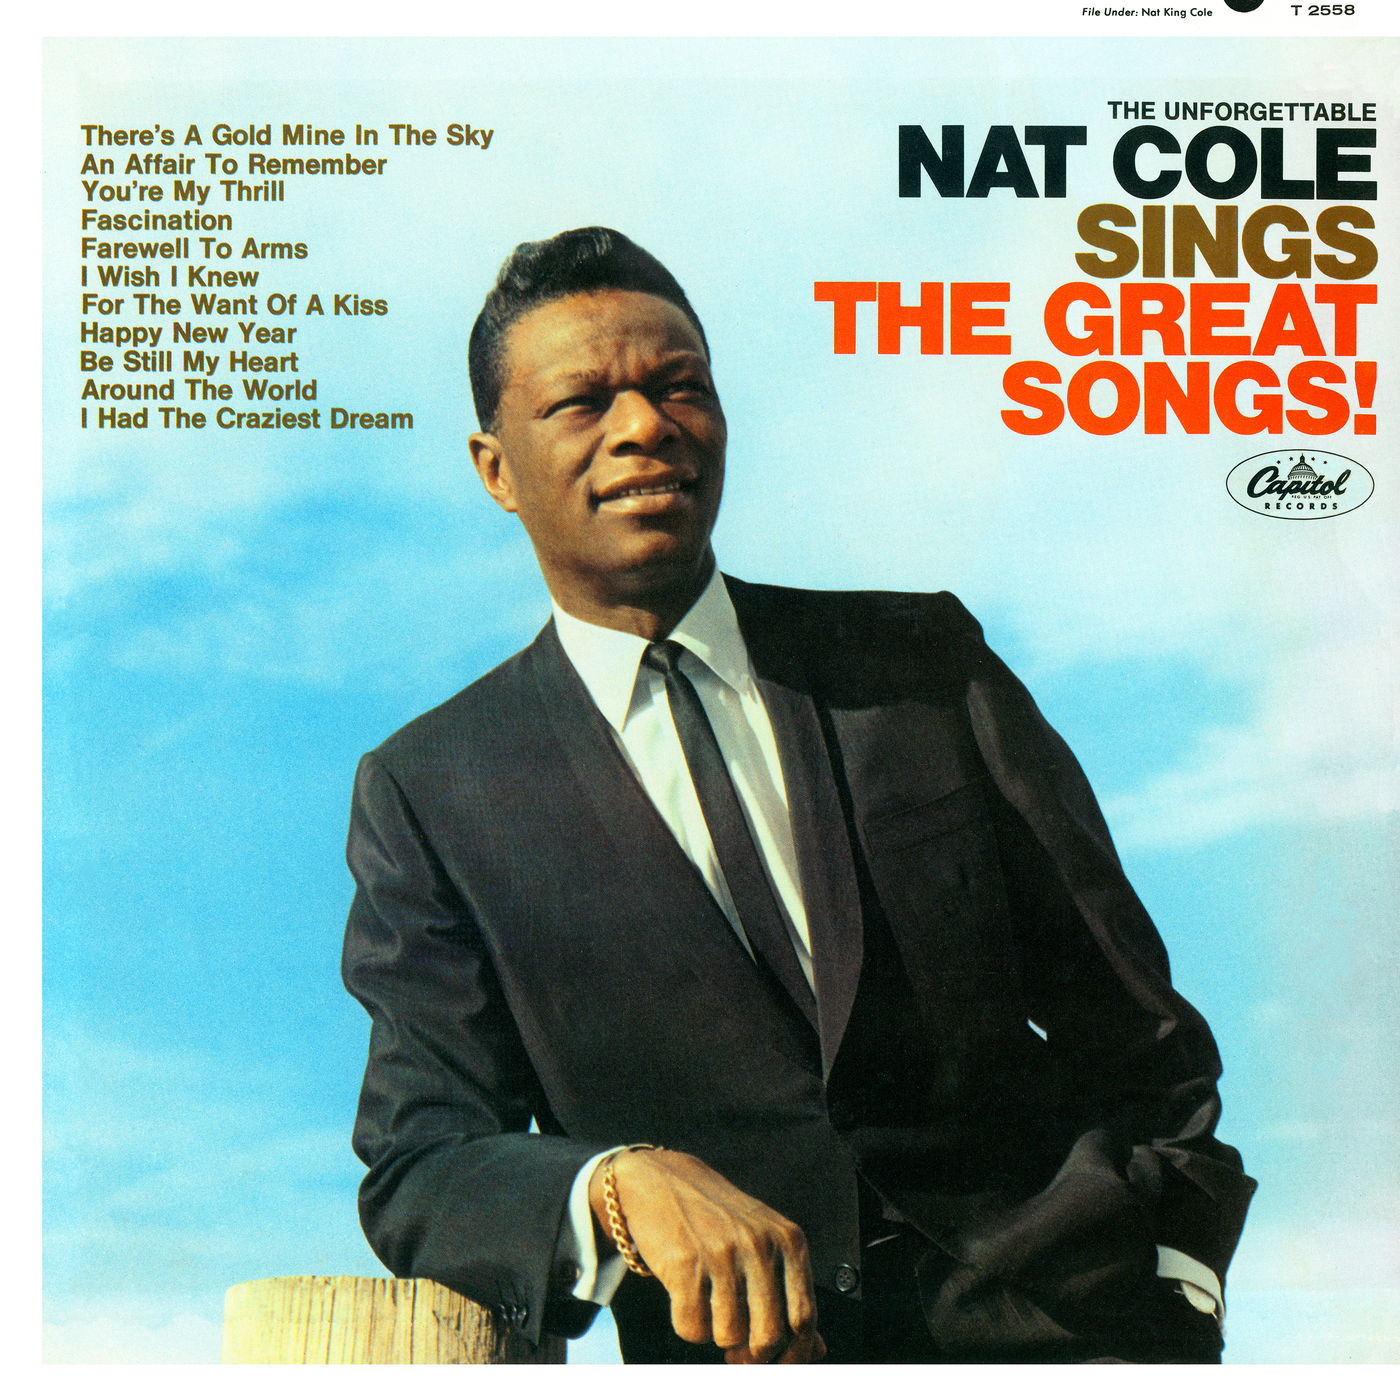 Nat King Cole - The Unforgettable Nat King Cole Sings The Great Songs (1966/2021) [FLAC 24bit/96kHz]